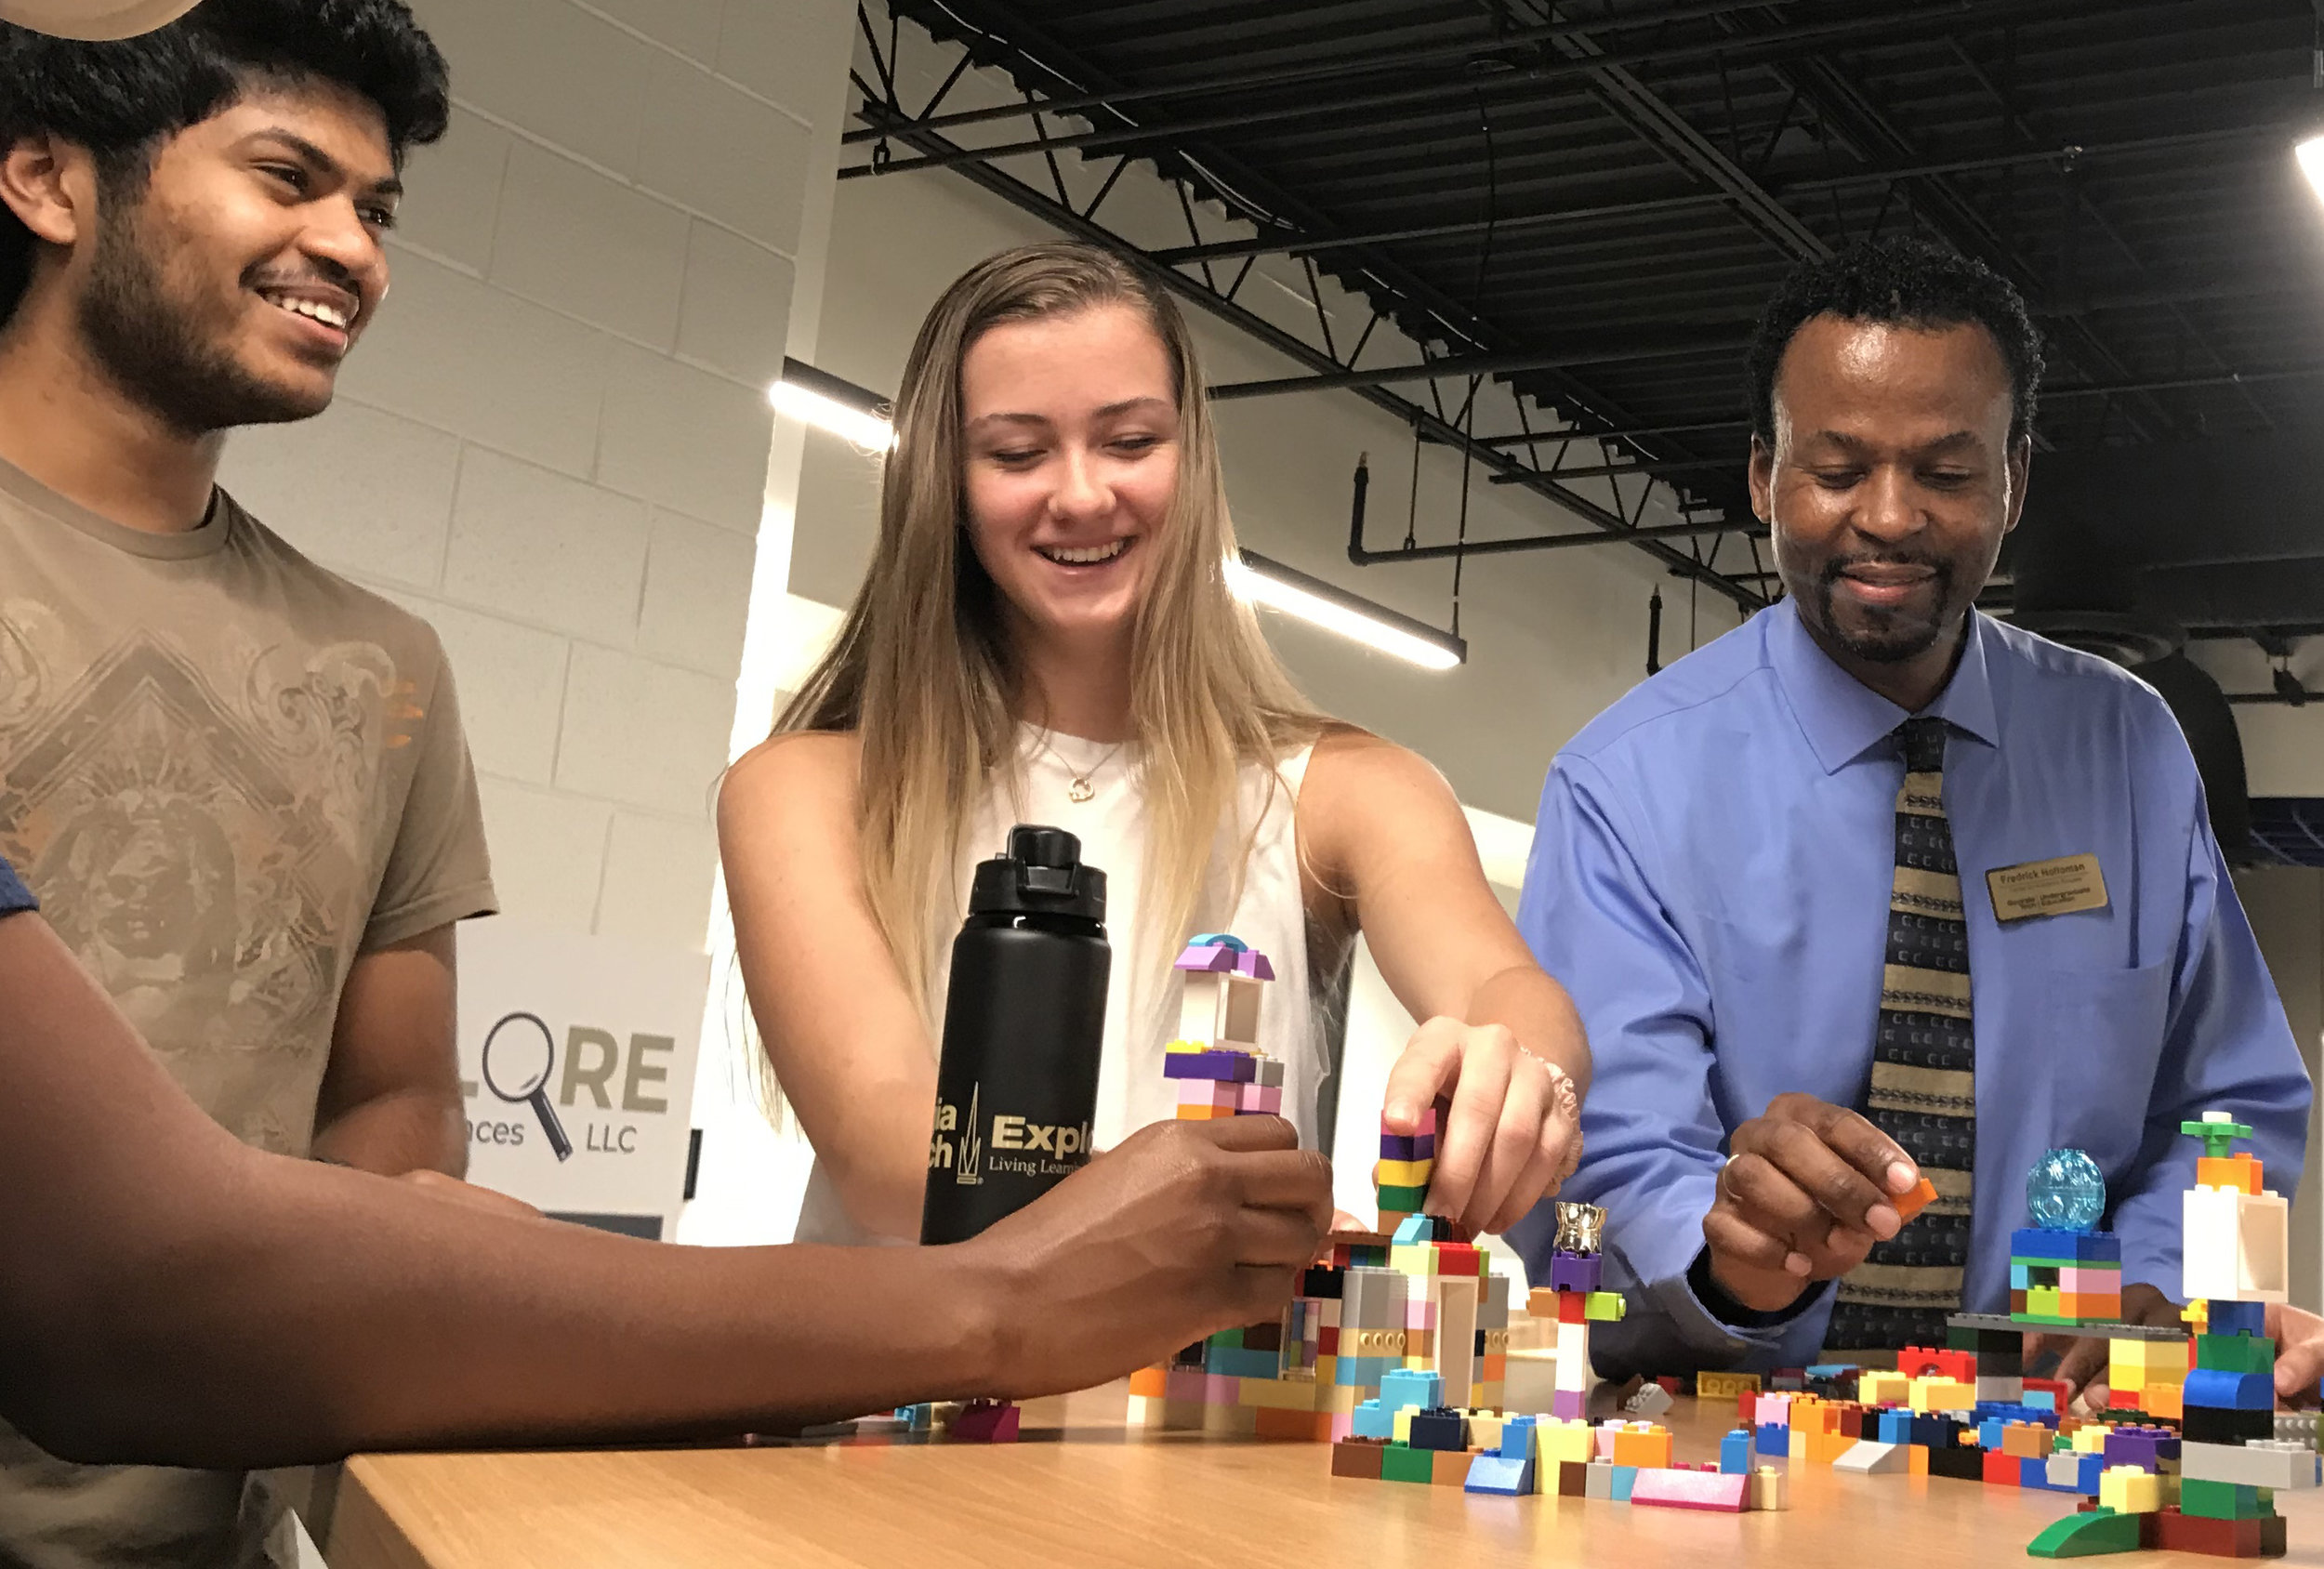  Living Learning Communities at Georgia Tech provide students with the space and curriculum to learn, live, and work together. Here, students and faculty building community through hands-on activities. 